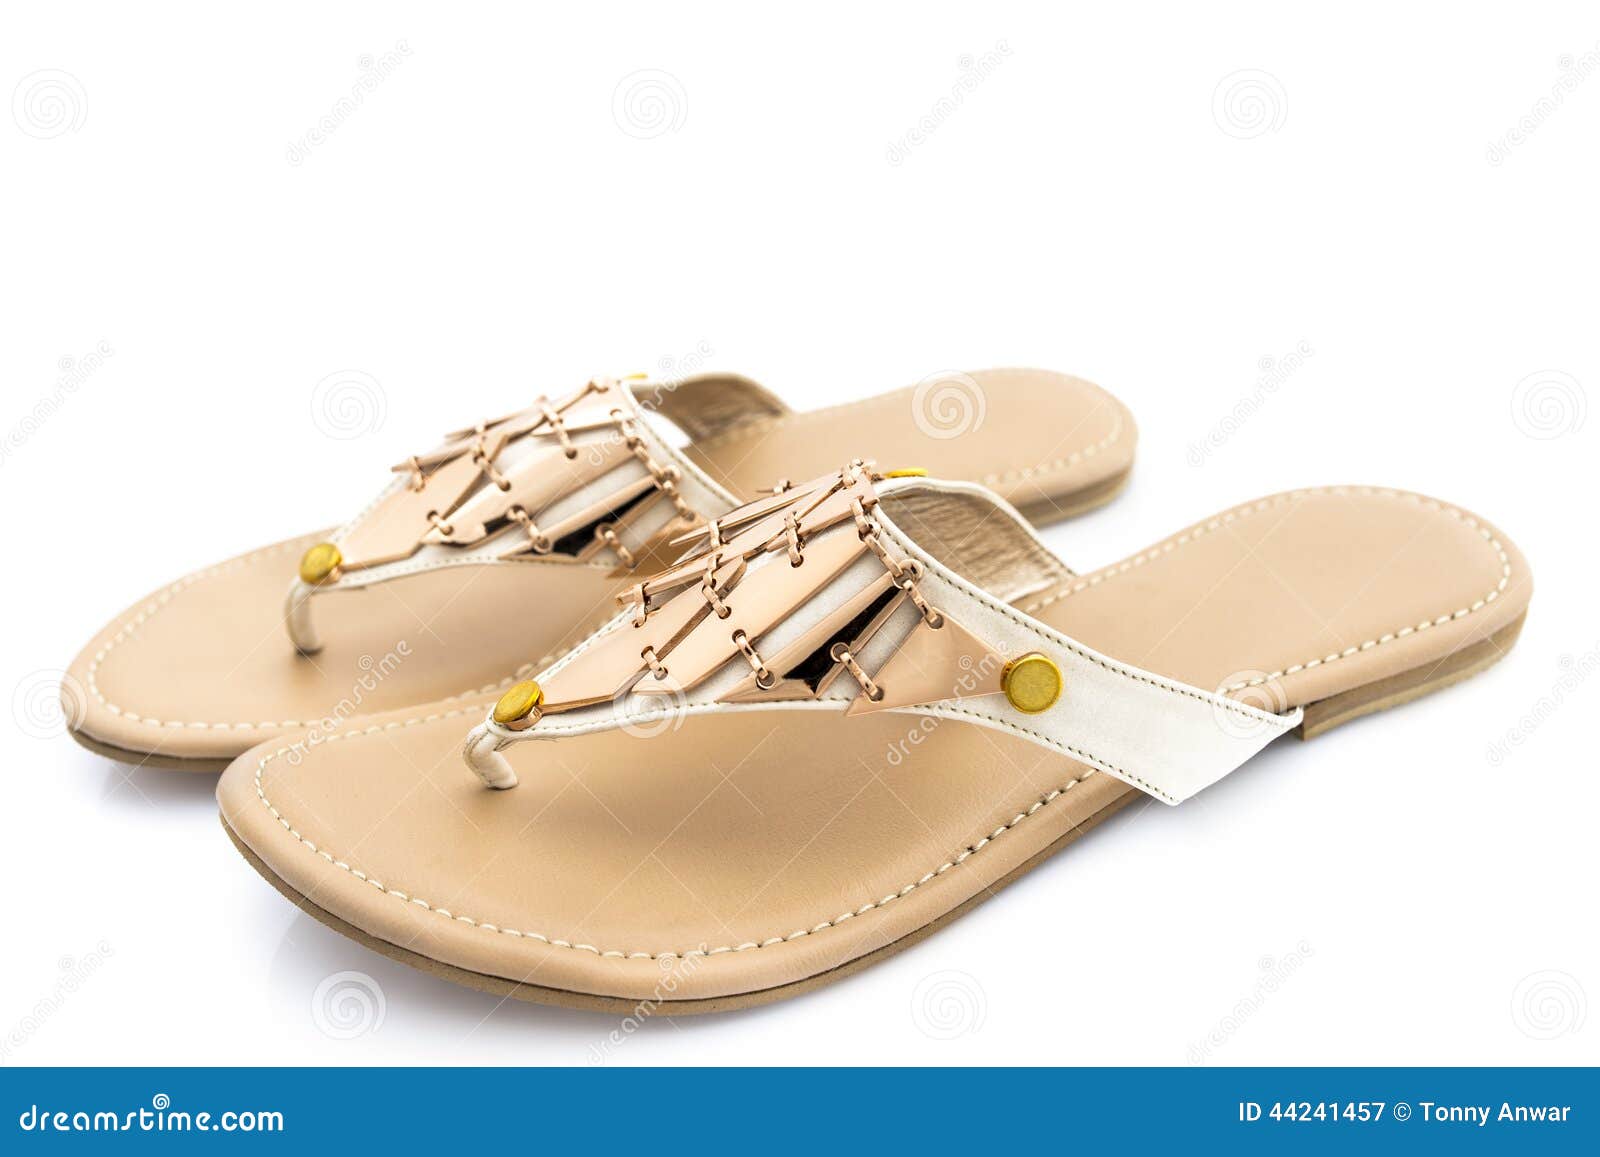 Sandals stock image. Image of footwear, fashion, pair - 44241457